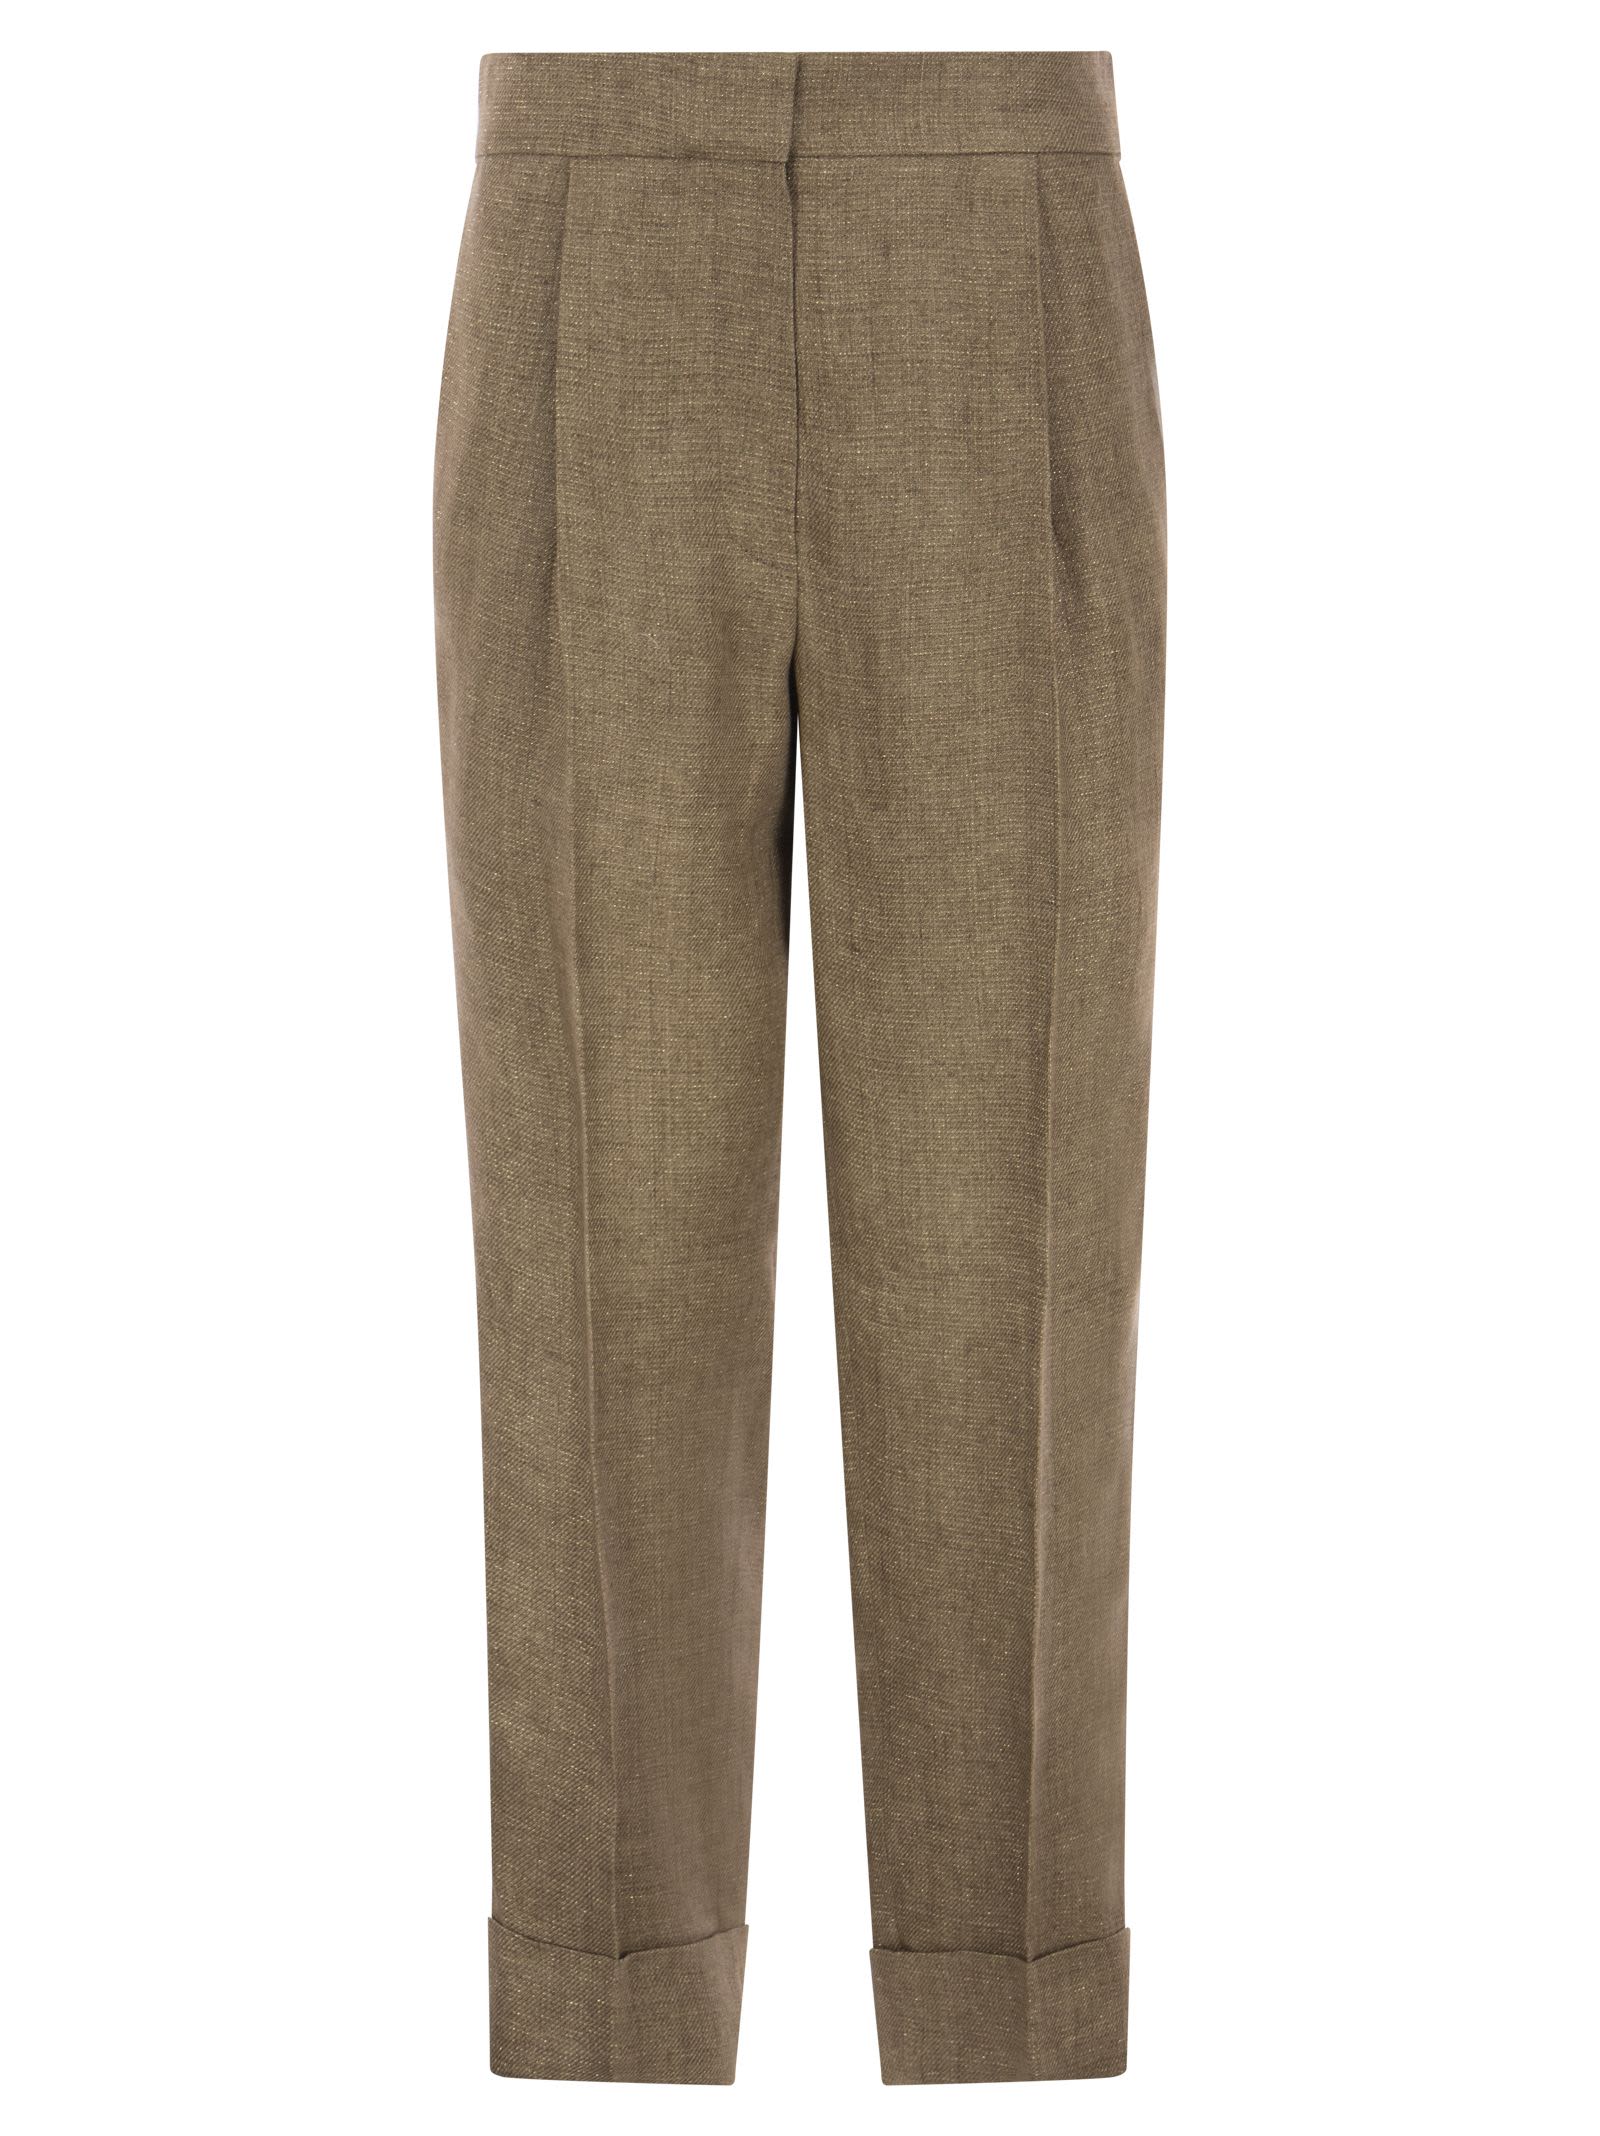 Brunello Cucinelli Relaxed Sartorial Trousers In Sparkling Washed Linen Twill